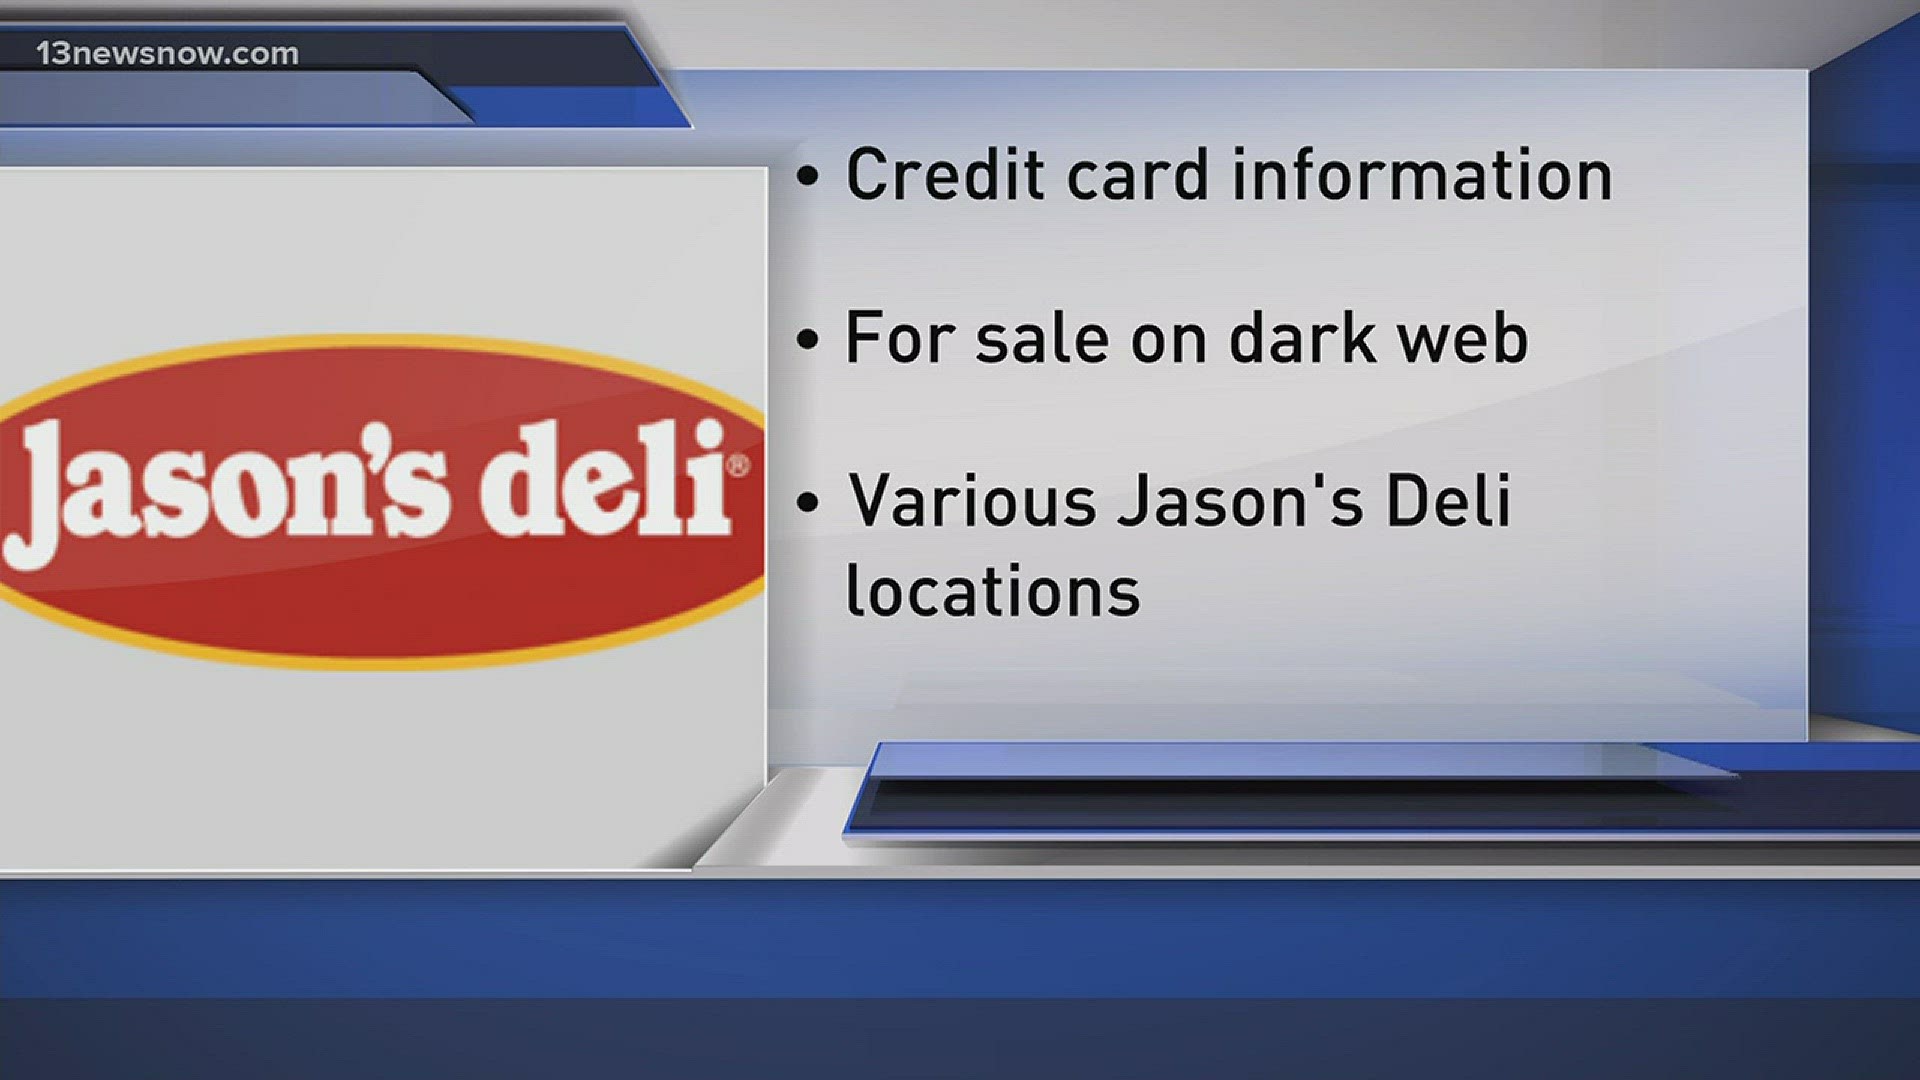 Customers of Jason's Deli may need to keep a closer eye on their credit card statements